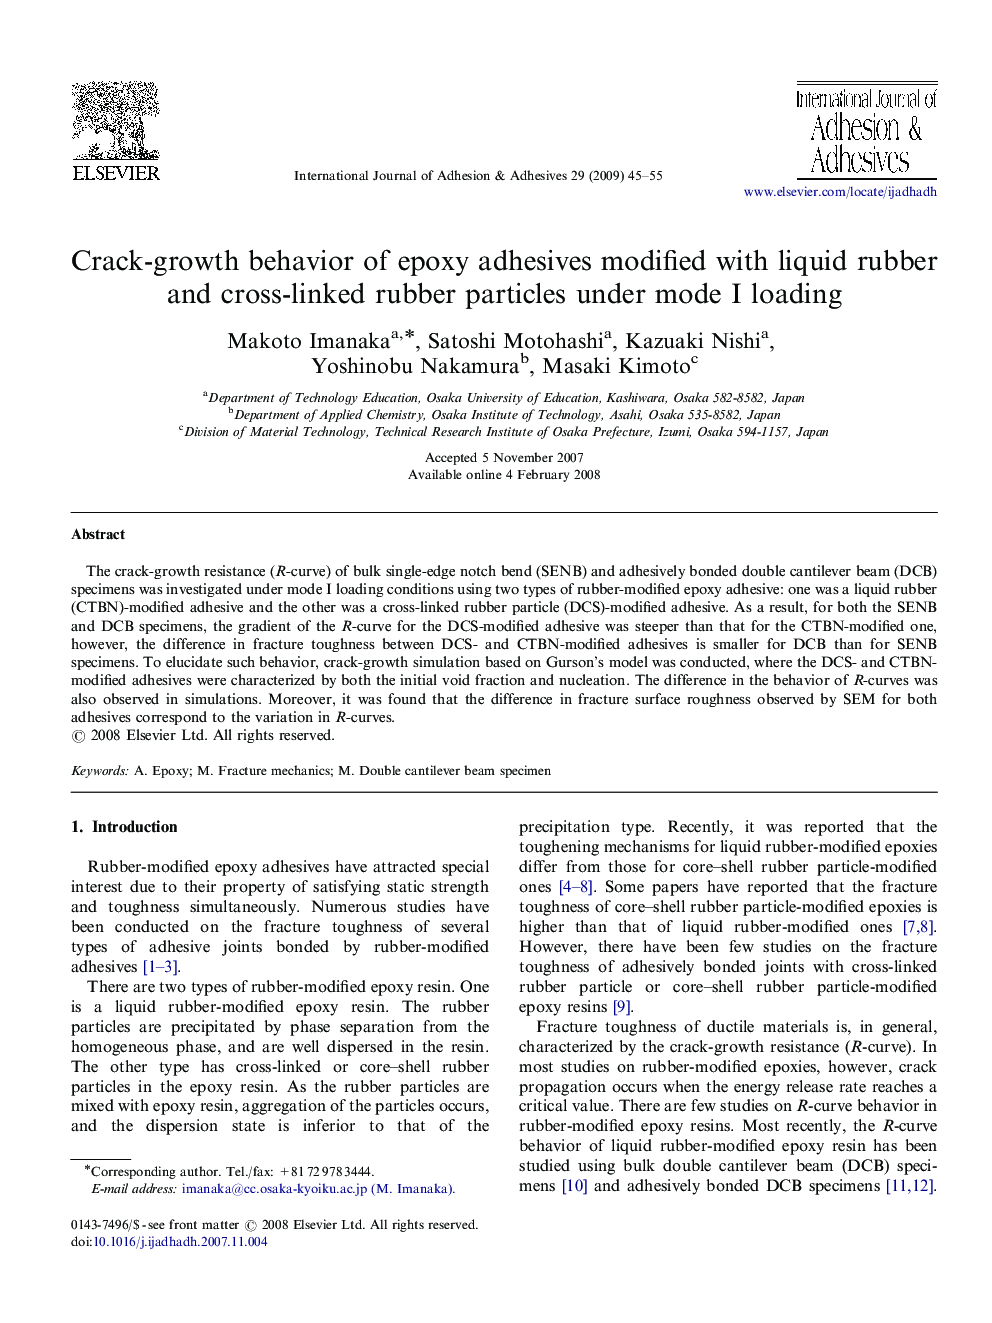 Crack-growth behavior of epoxy adhesives modified with liquid rubber and cross-linked rubber particles under mode I loading